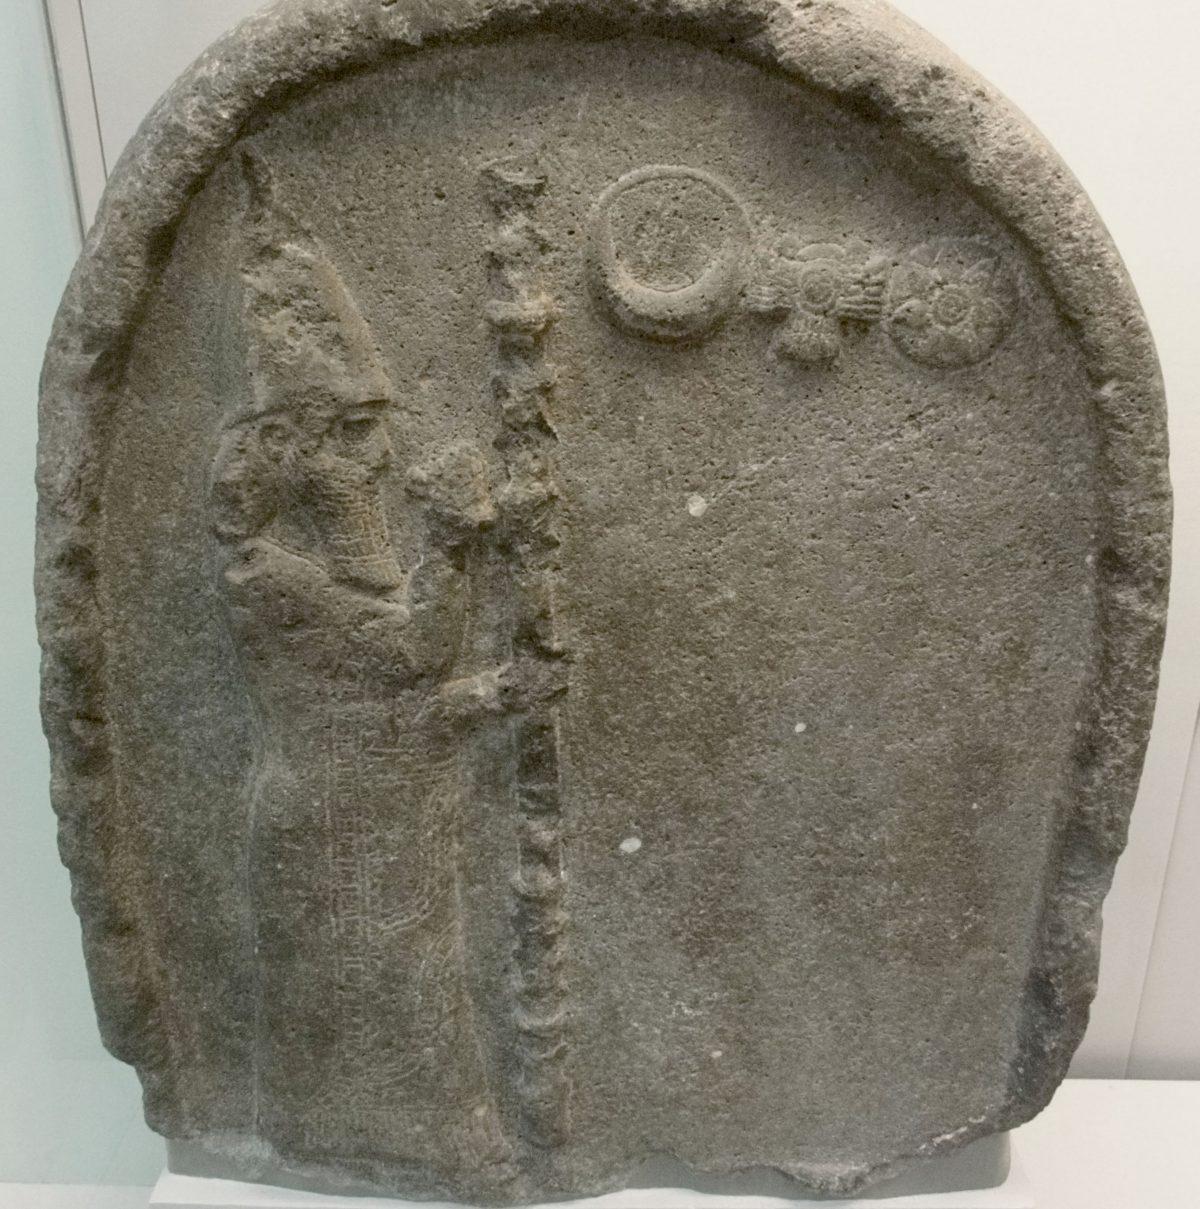 Stele of Nabonidus. Nabonidus is considered the first archaeologist and is here seen praying to the sun, moon, and Venus. A portion of text, on the right side of the stele, is still possible to decipher and recounts how the gods put an end to a drought due to good deeds of a Babylonian king. British Museum. (Public Domain)